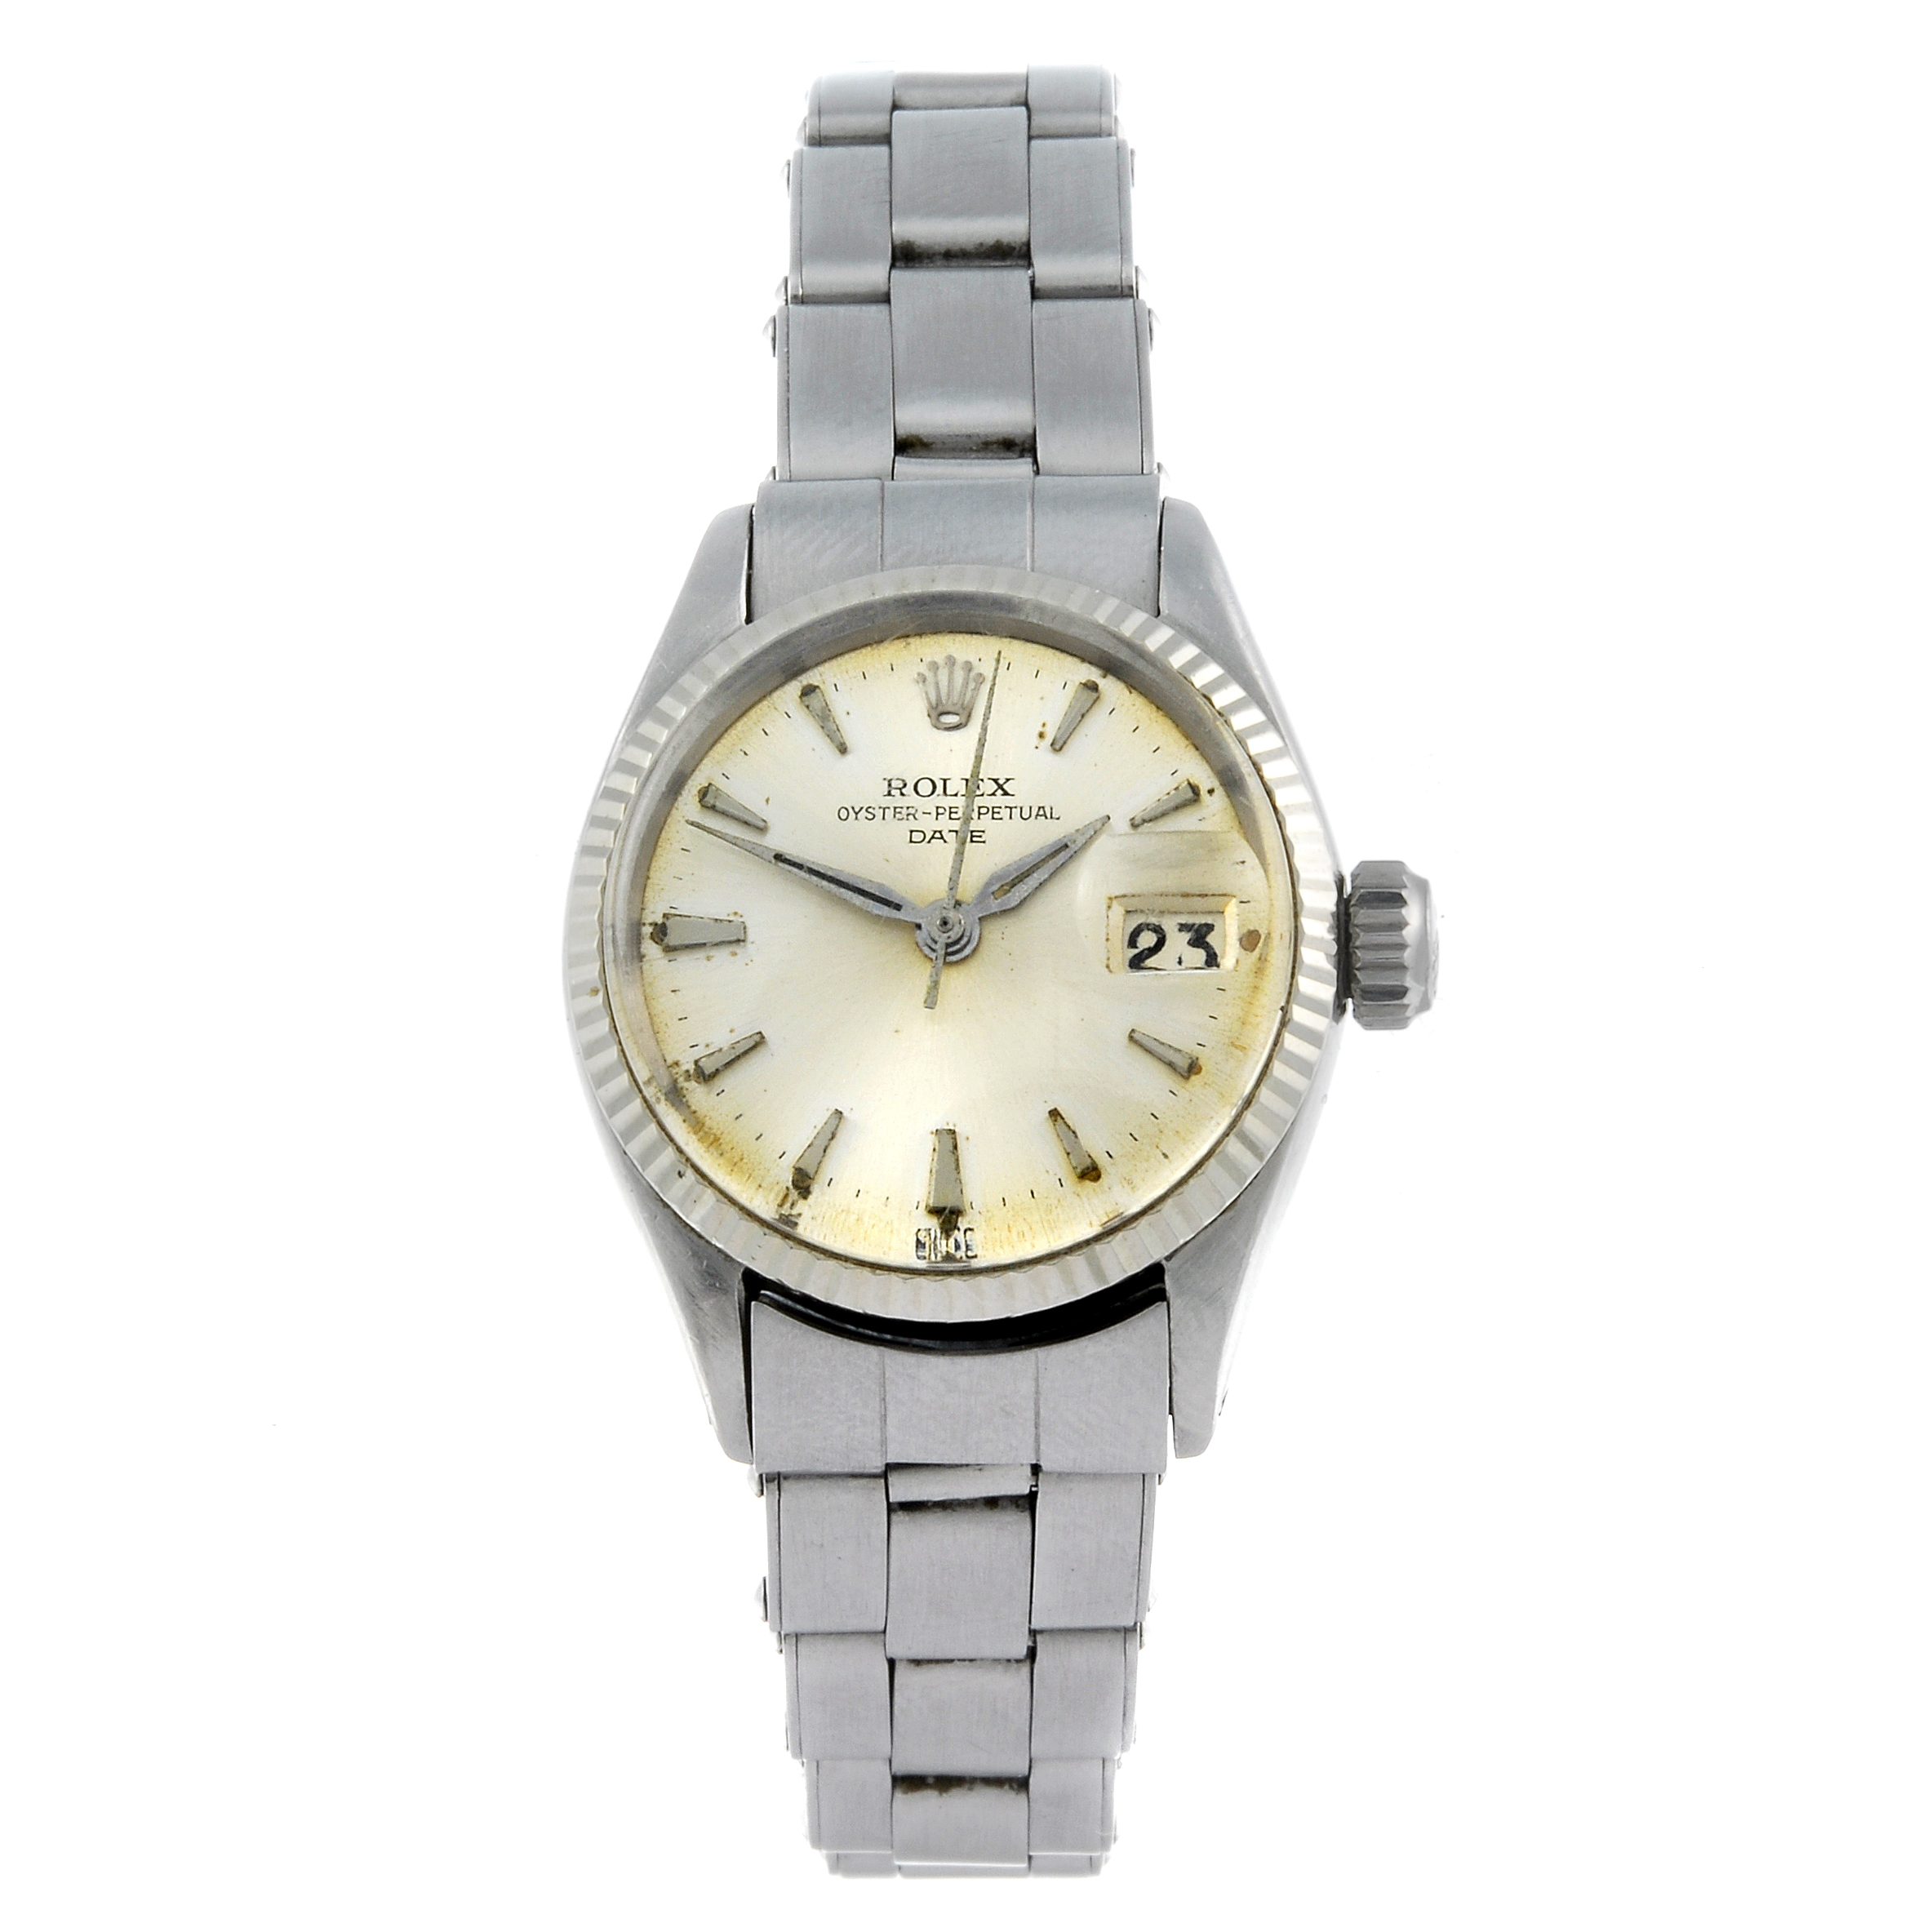 ROLEX - a lady's Oyster Perpetual Date bracelet watch. Circa 1963. Stainless steel case with white